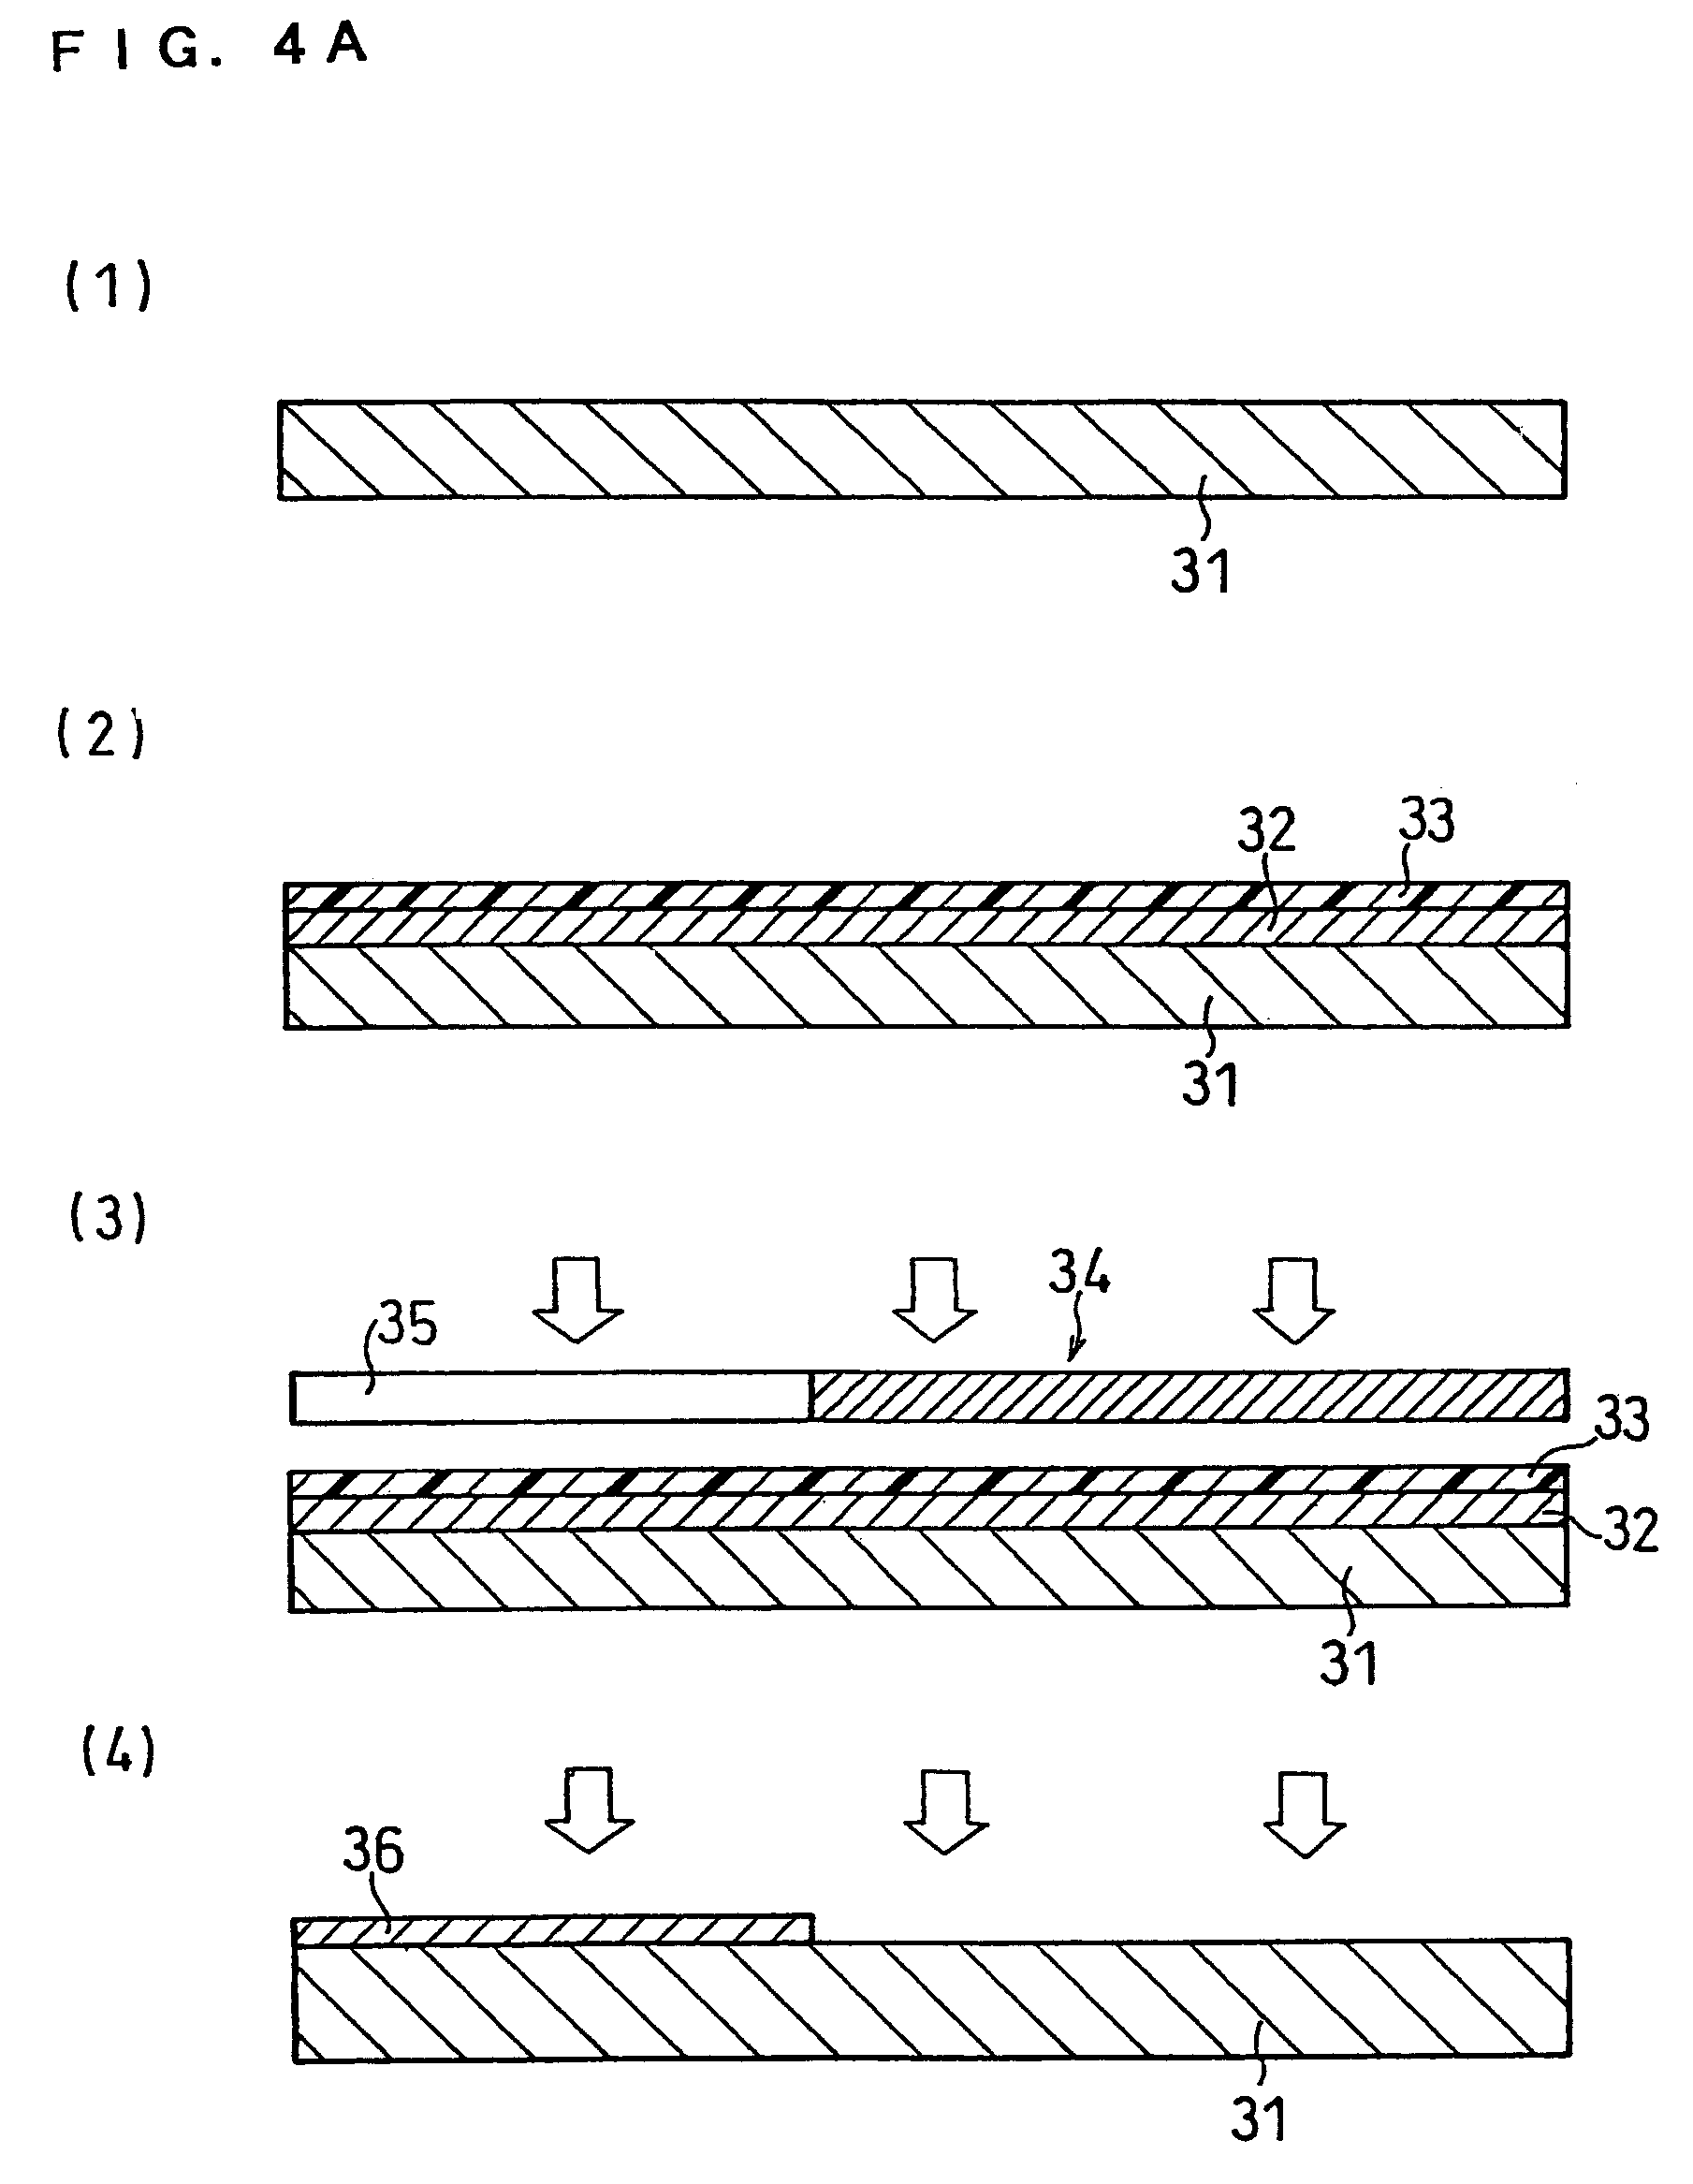 Battery mounted integrated circuit device having diffusion layers that prevent cations serving to charge and discharge battery from diffusing into the integrated circuit region